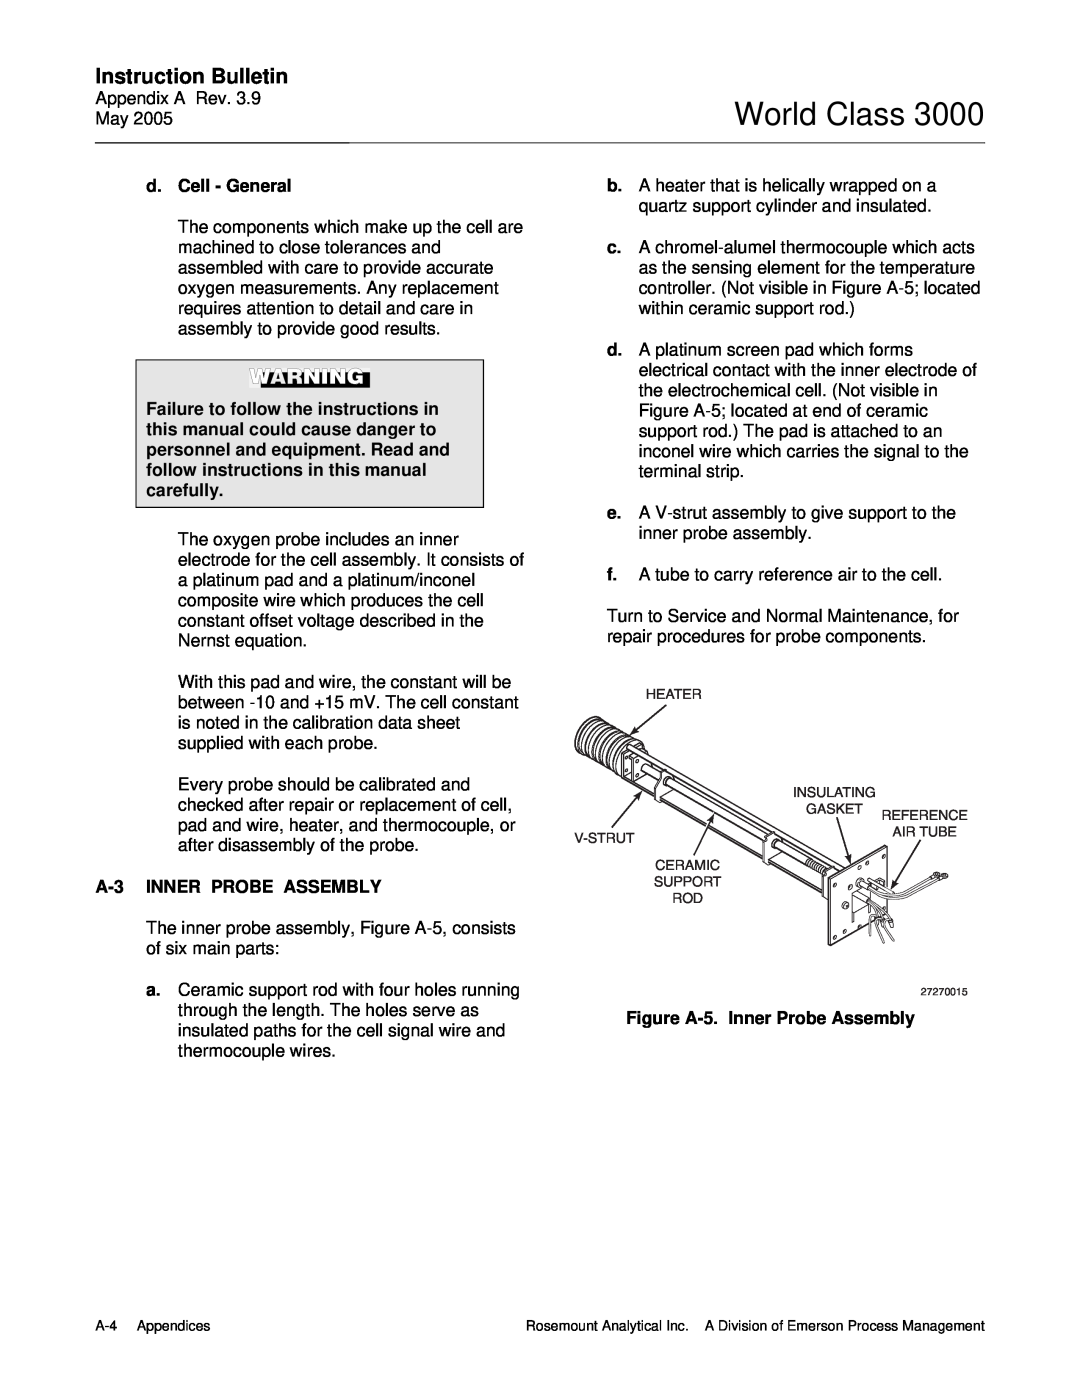 Emerson 3000 World Class, Instruction Bulletin, d.Cell - General, A-3INNER PROBE ASSEMBLY, Figure A-5.Inner Probe Assembly 